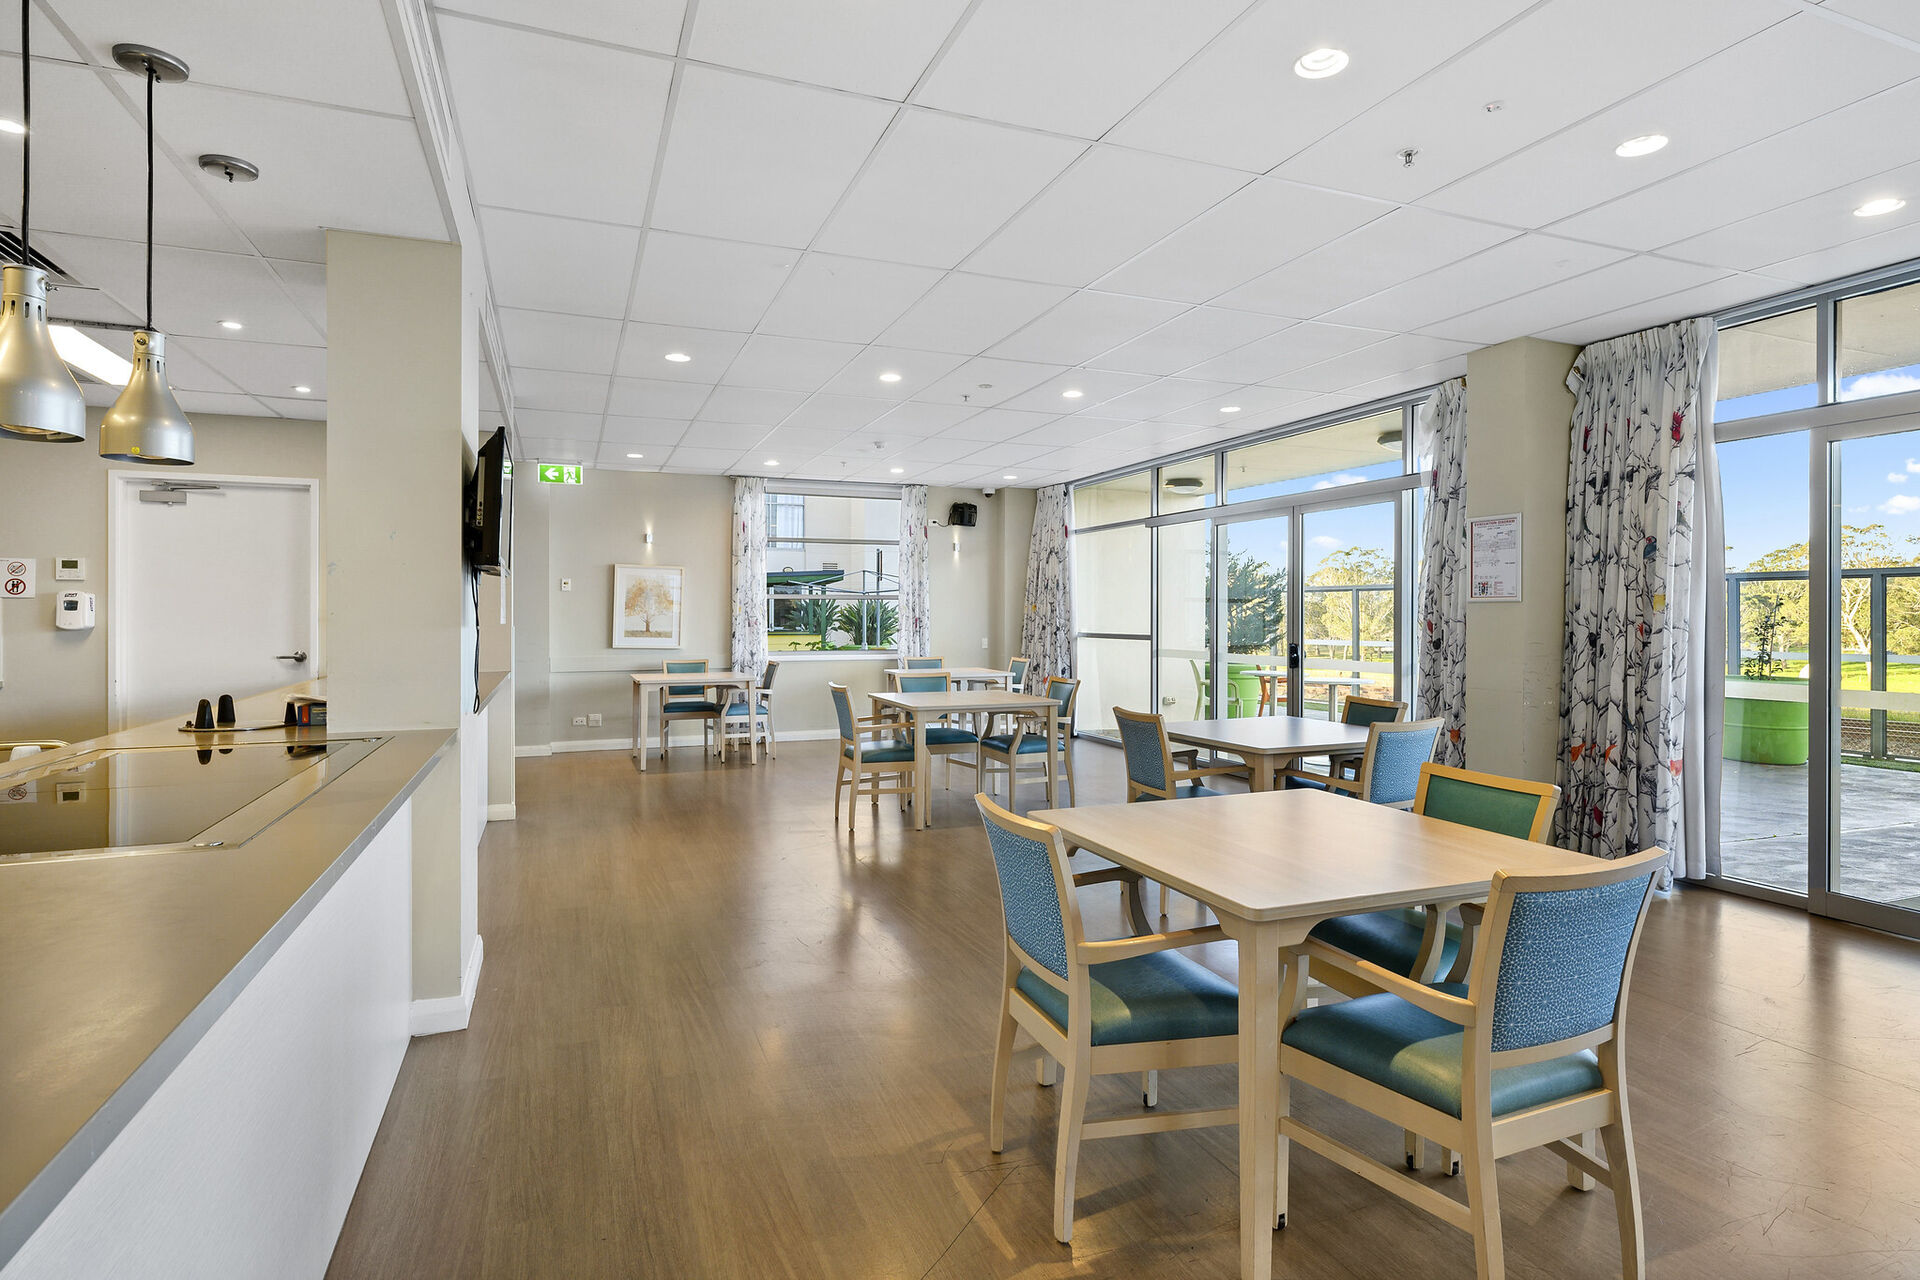 communal dining area for nursing home residents to enjoy a meal at baptistcare durham green centre aged care home in menangle nsw